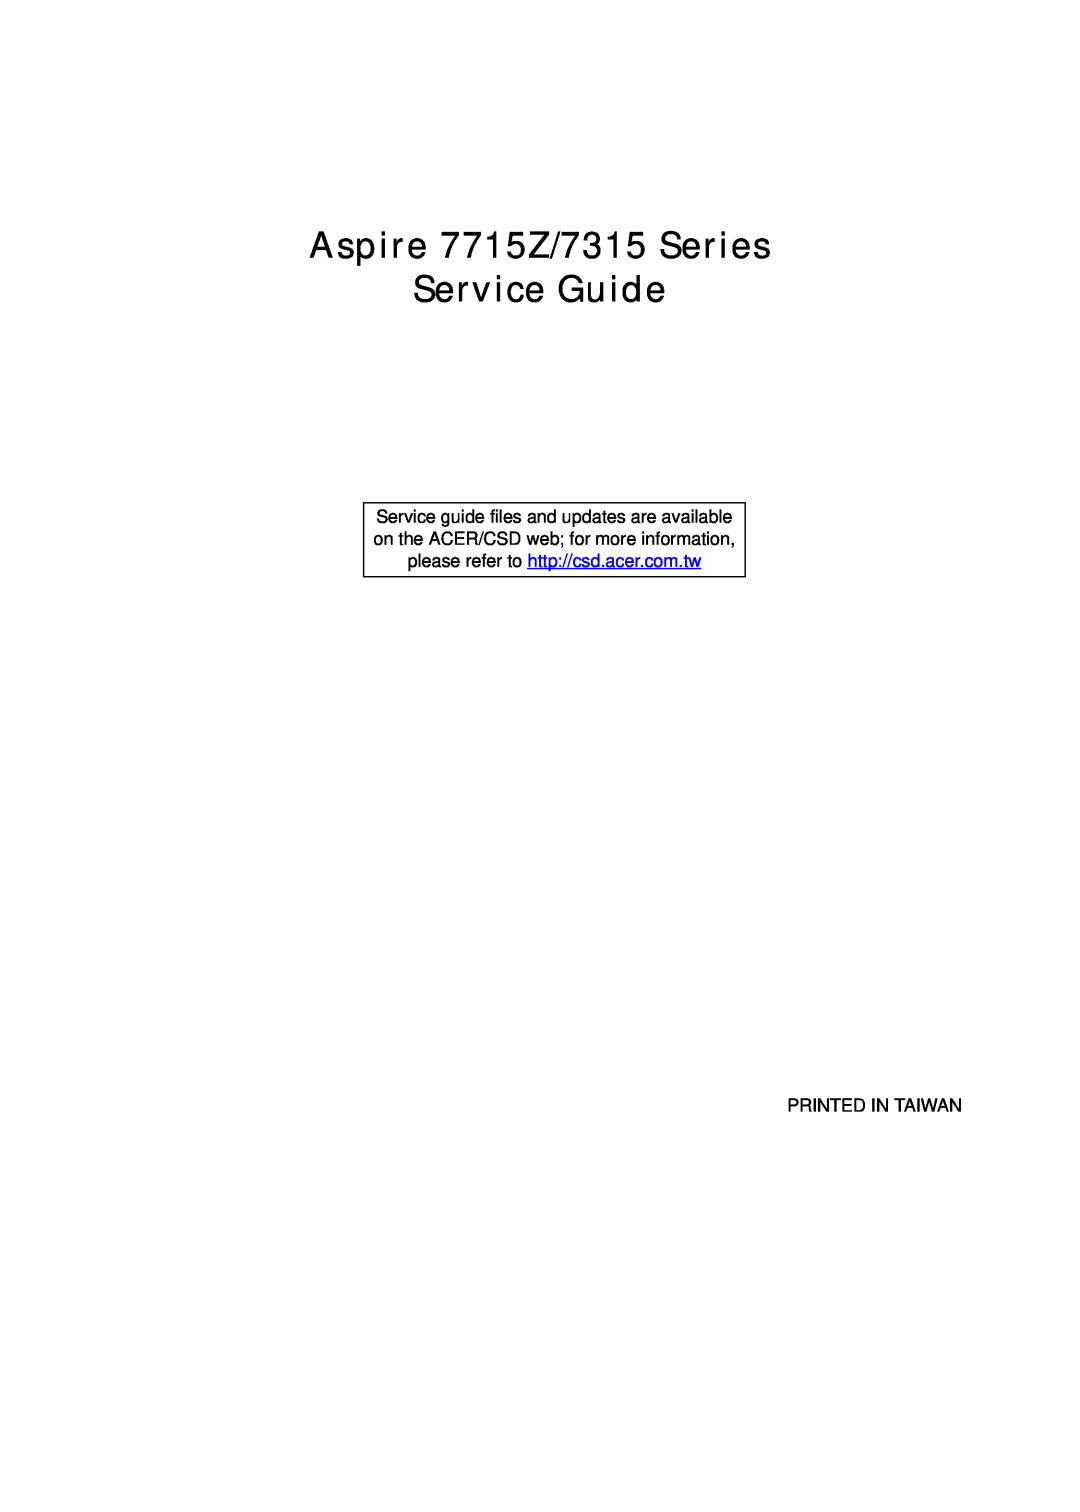 Acer manual Aspire 7715Z/7315 Series Service Guide, Printed In Taiwan 